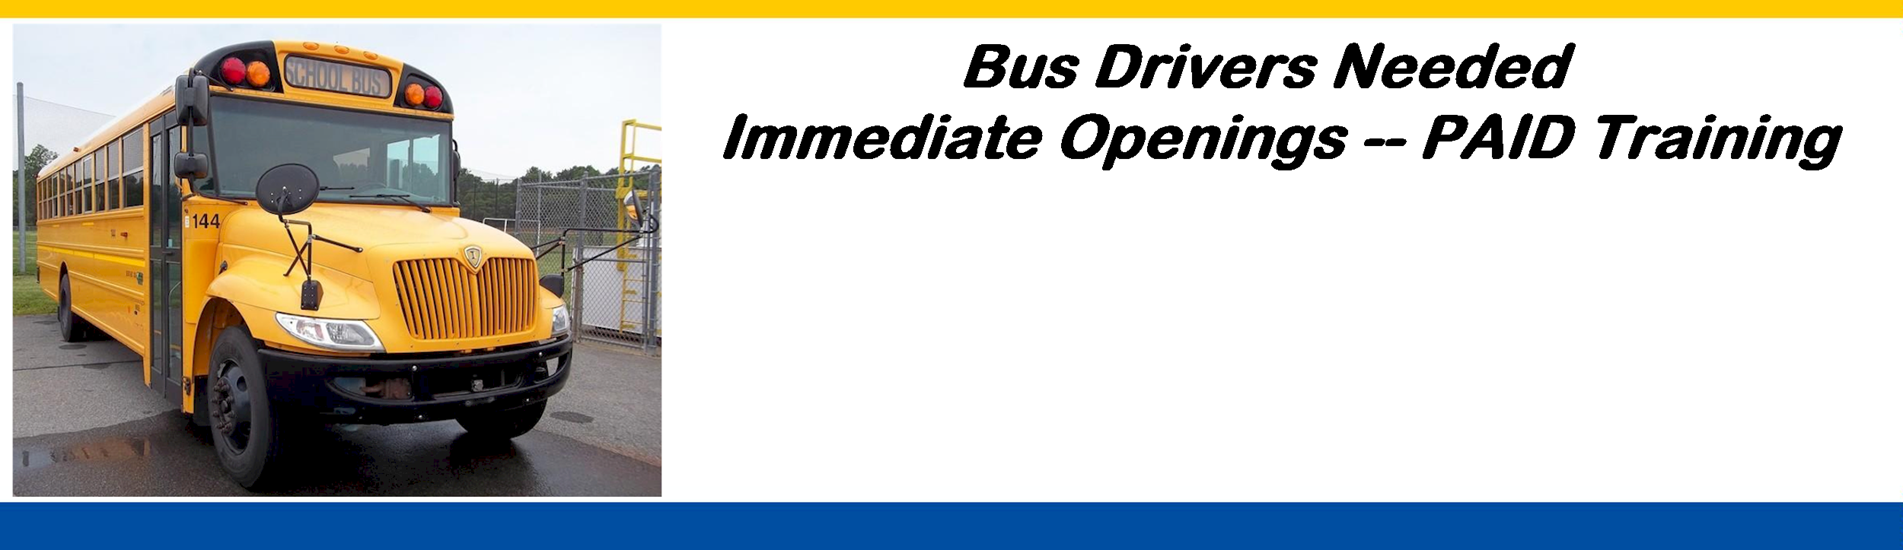 Bus Drivers Needed